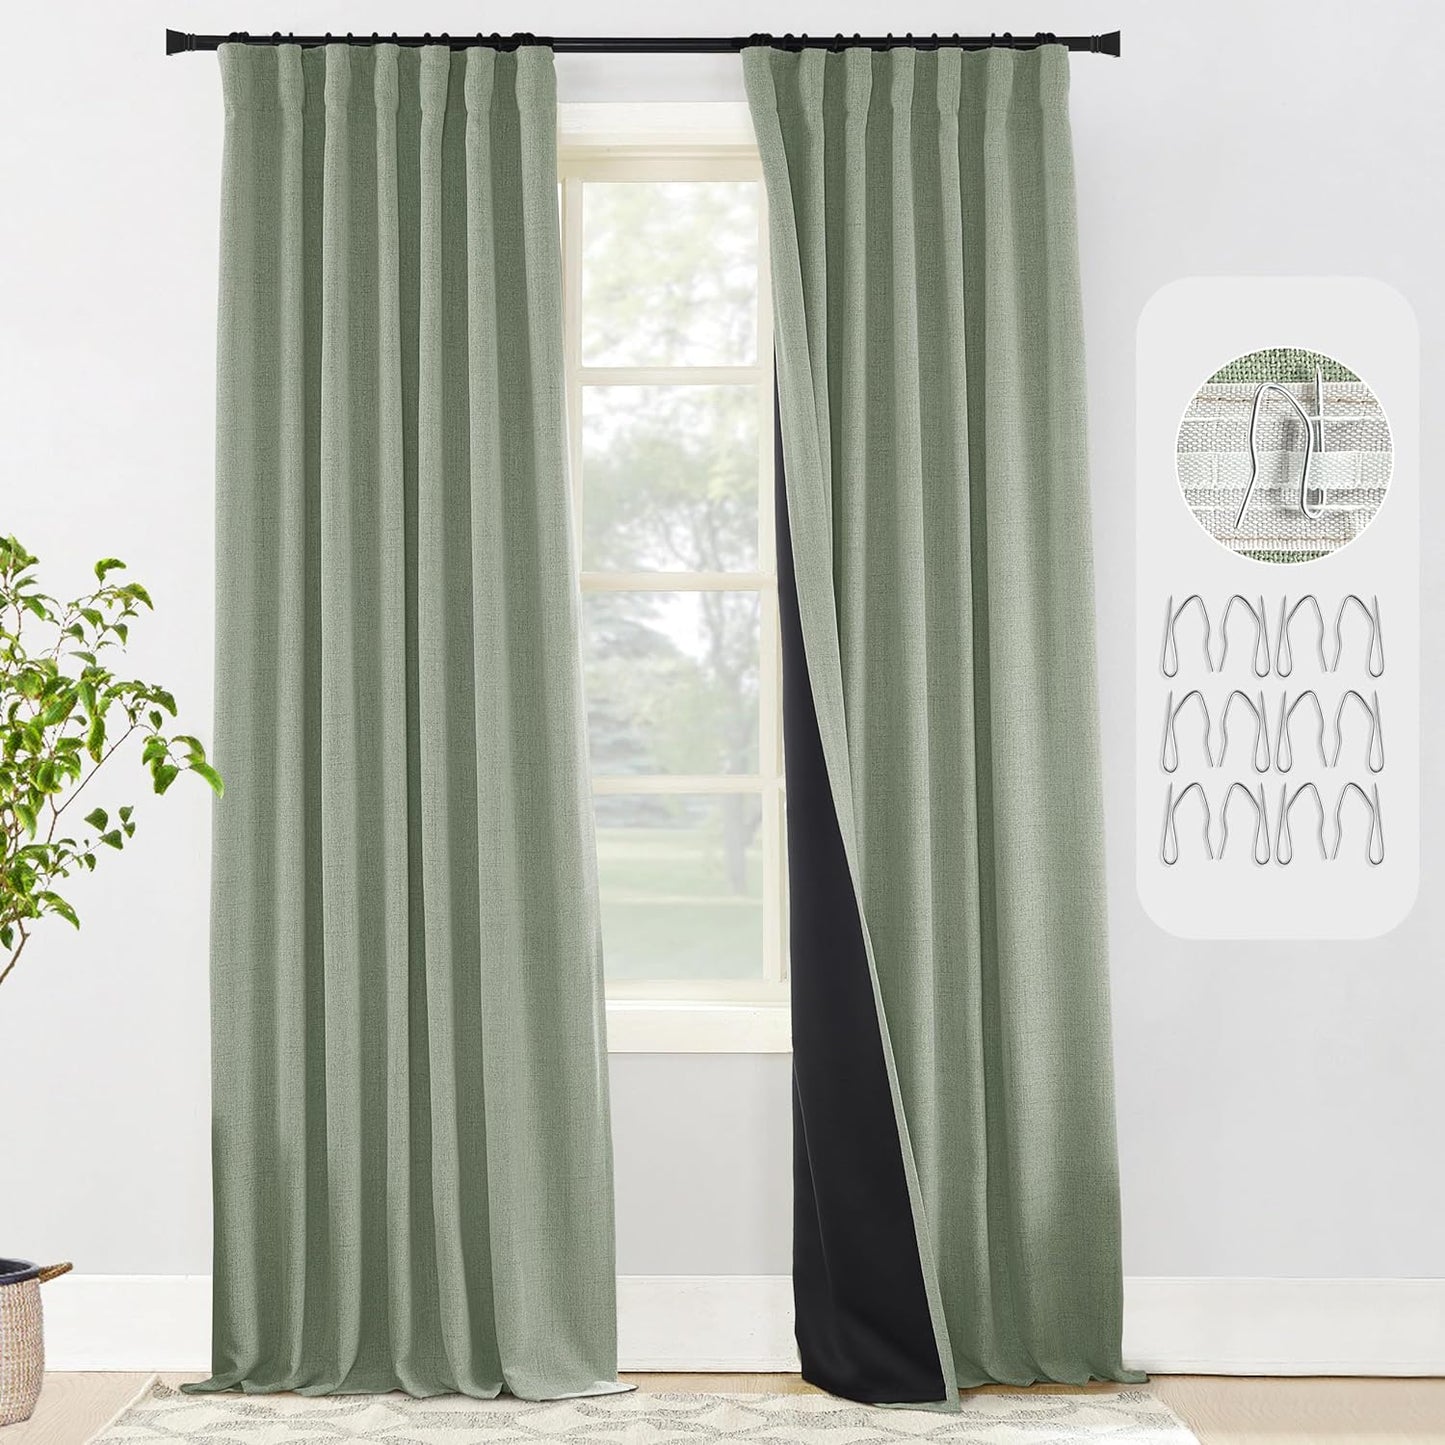 Sage Green Blackout Curtains 84 Inch Length 2 Panels Set for Bedroom Linen Aesthetic Boho Greyish Light Green Window Room Darkening Curtains for Living Room Kids Boys Room,Back Tab Pleated,84 in Long  PANELSBURG Sage Green 50"W X 108"L 